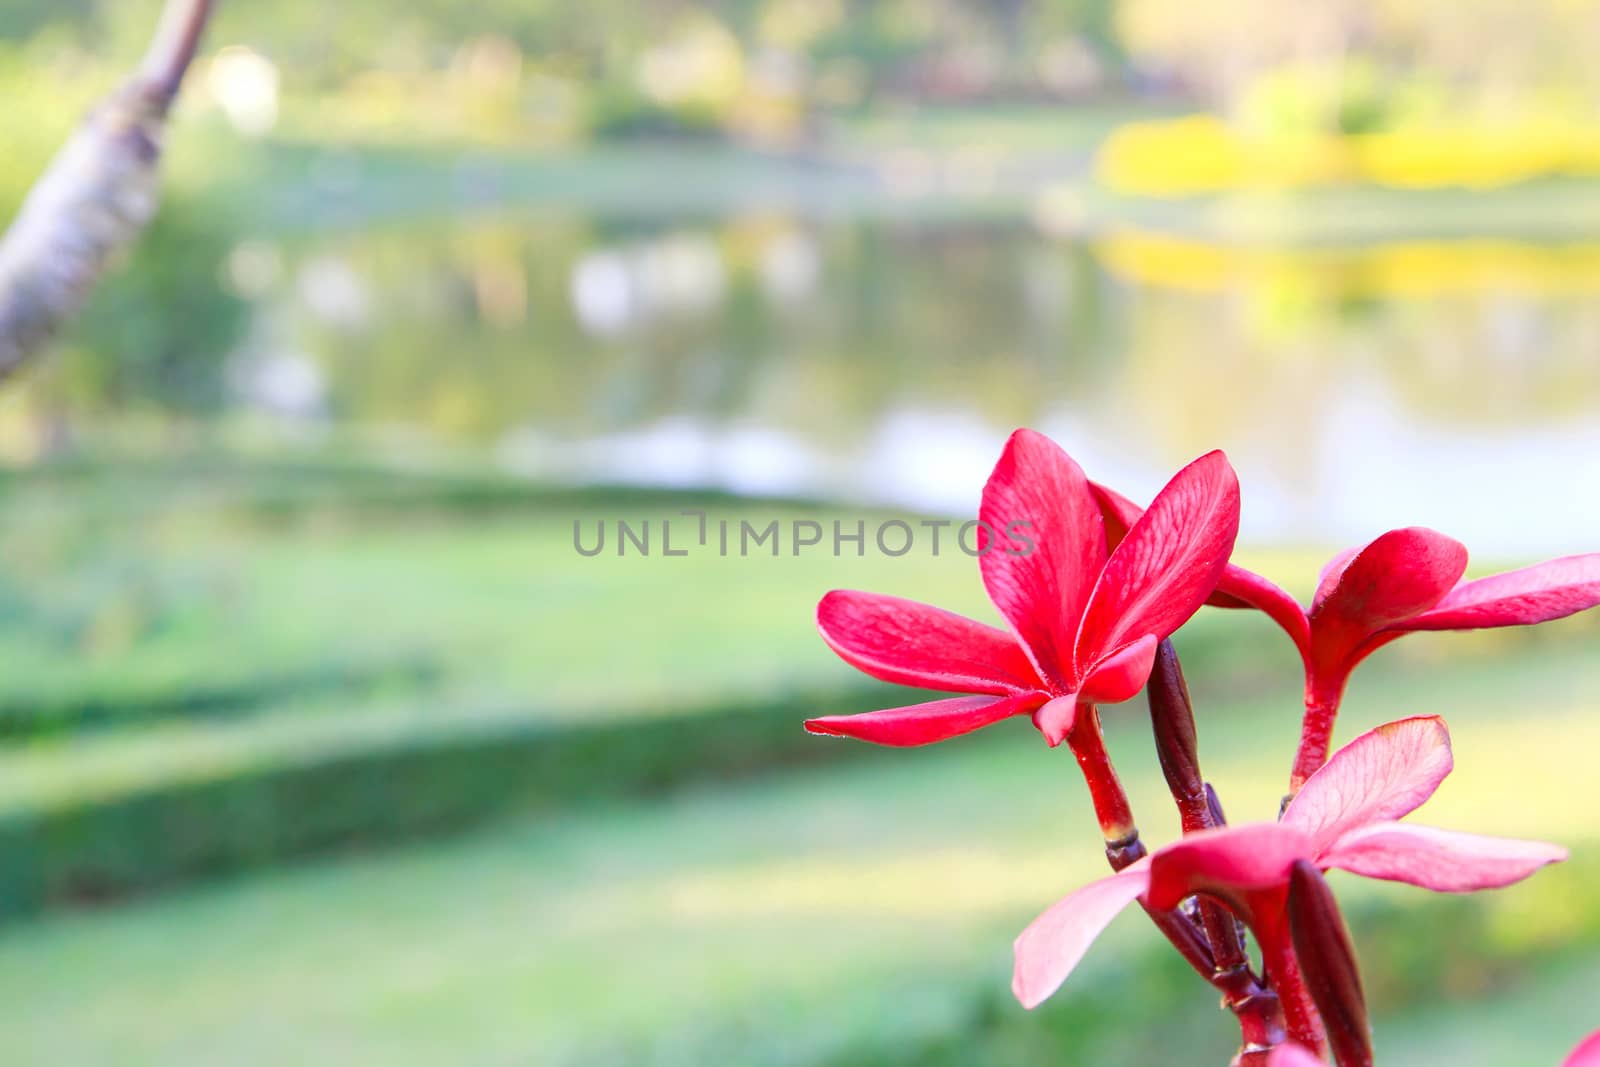 Red frangipani flowers with park in the background.